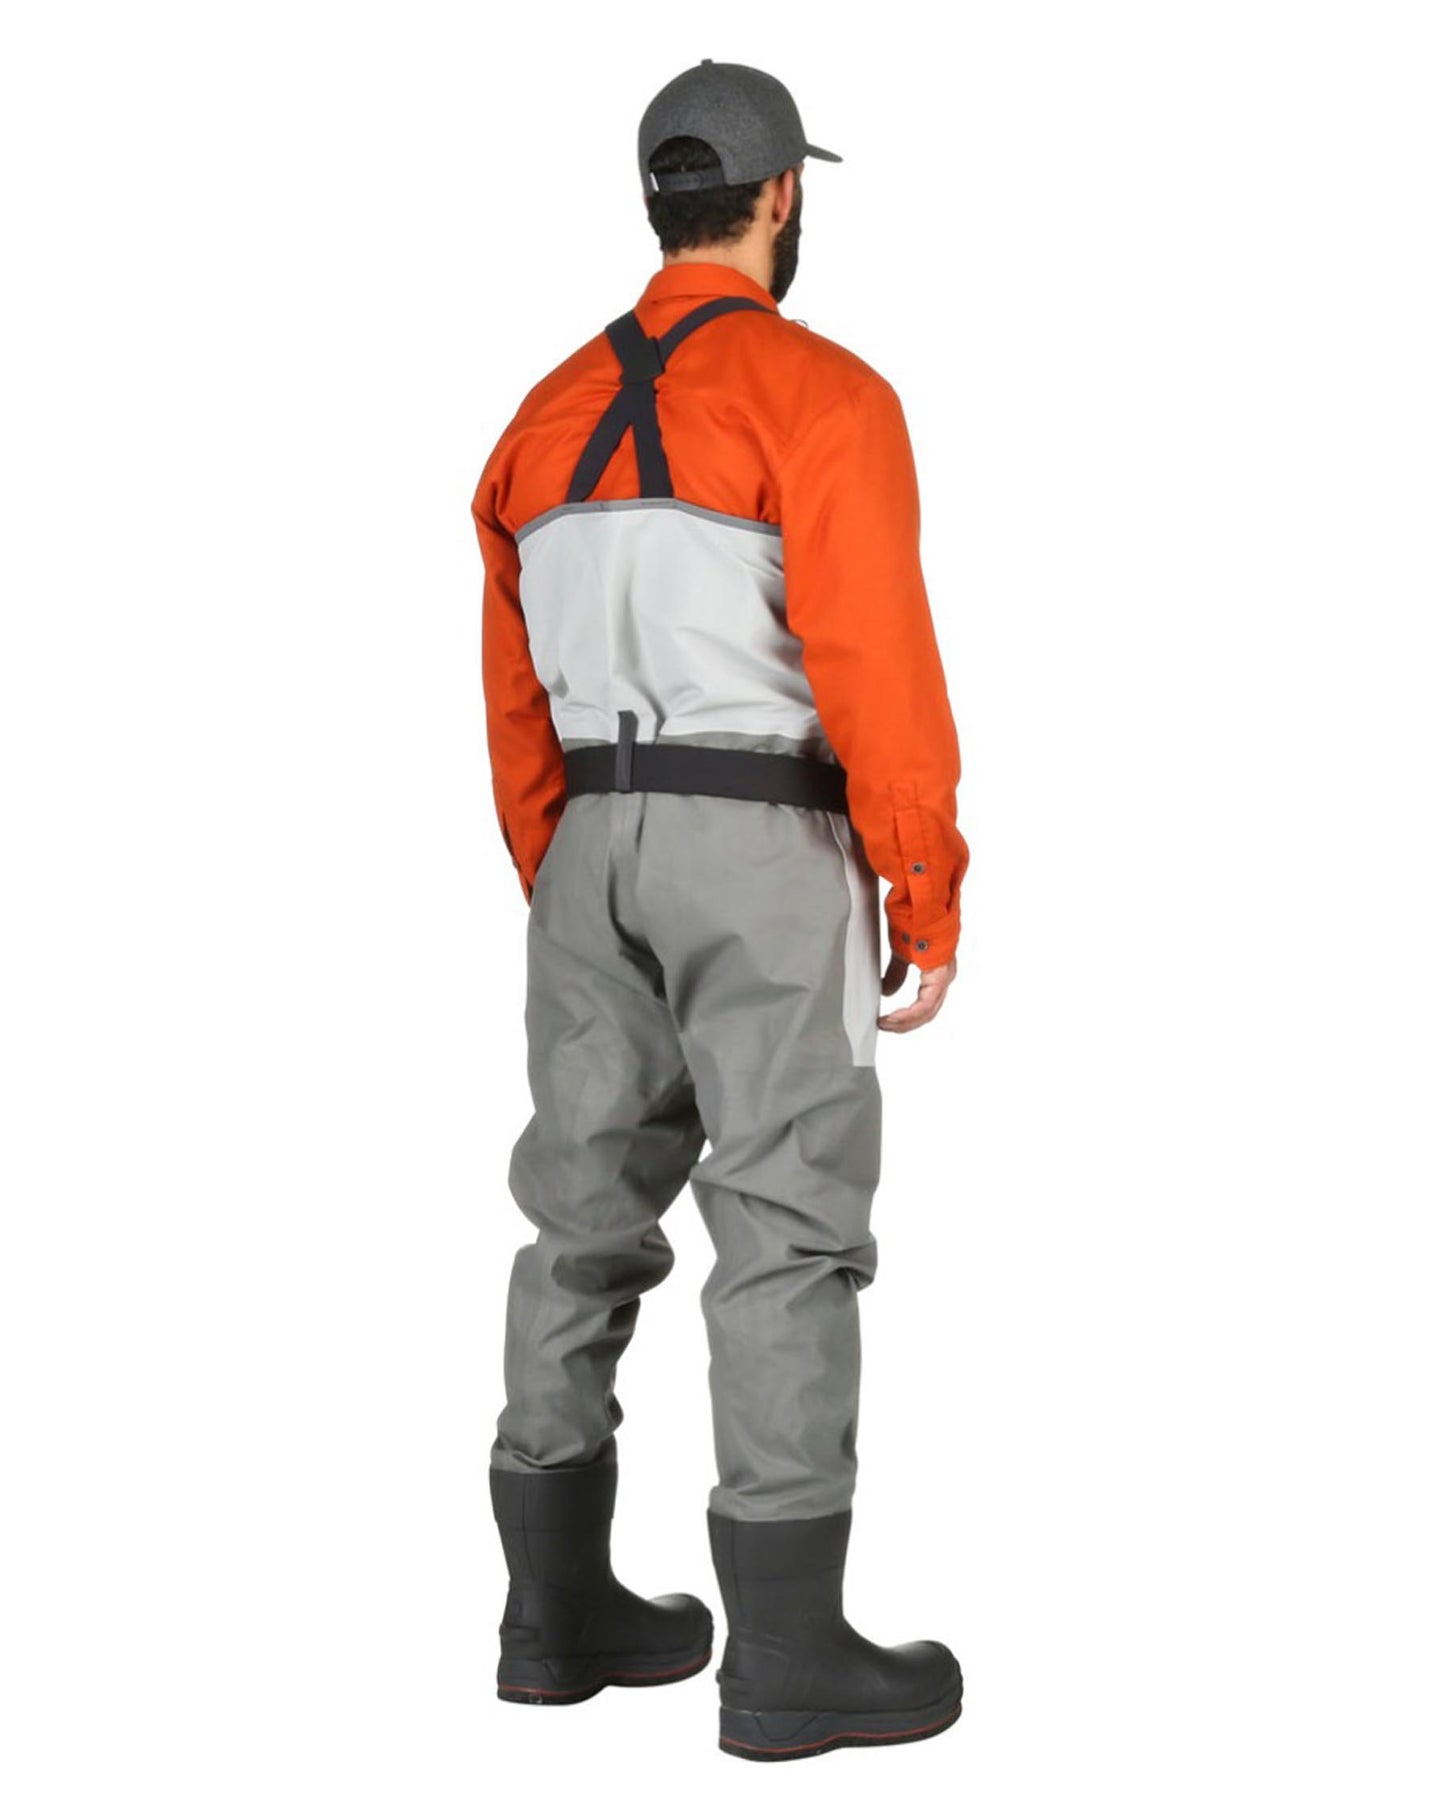 2021 M's G3 Guide Waders - Bootfoot - Vibram Sole